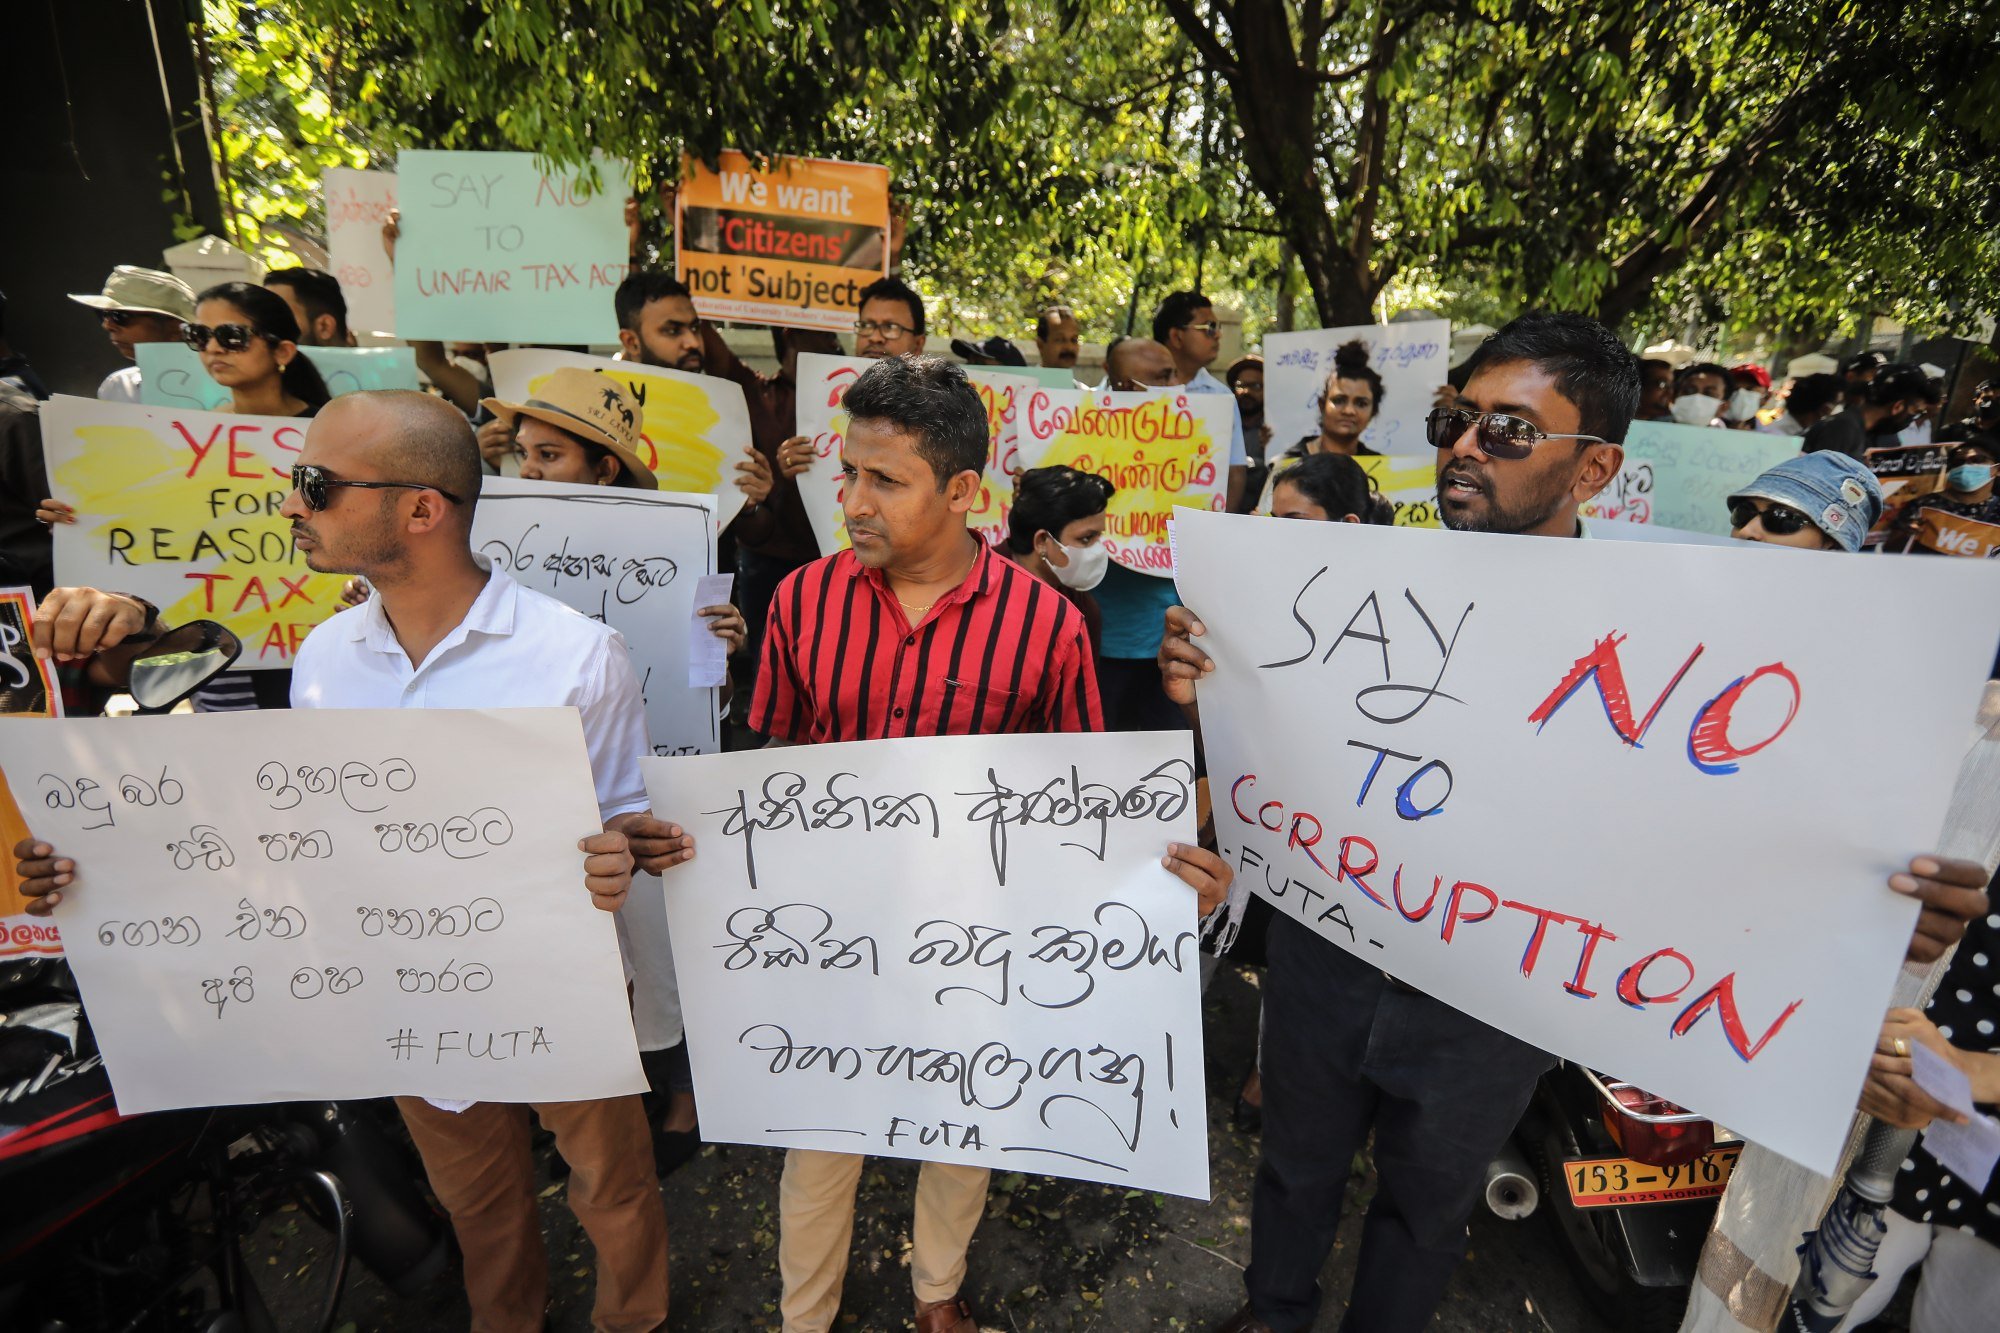 Protesters demonstrate against new tax policies and budget proposals in Colombo earlier this month. Sri Lanka’s economic crisis and severe shortages have spurred months-long protests. Photo: EPA-EFE